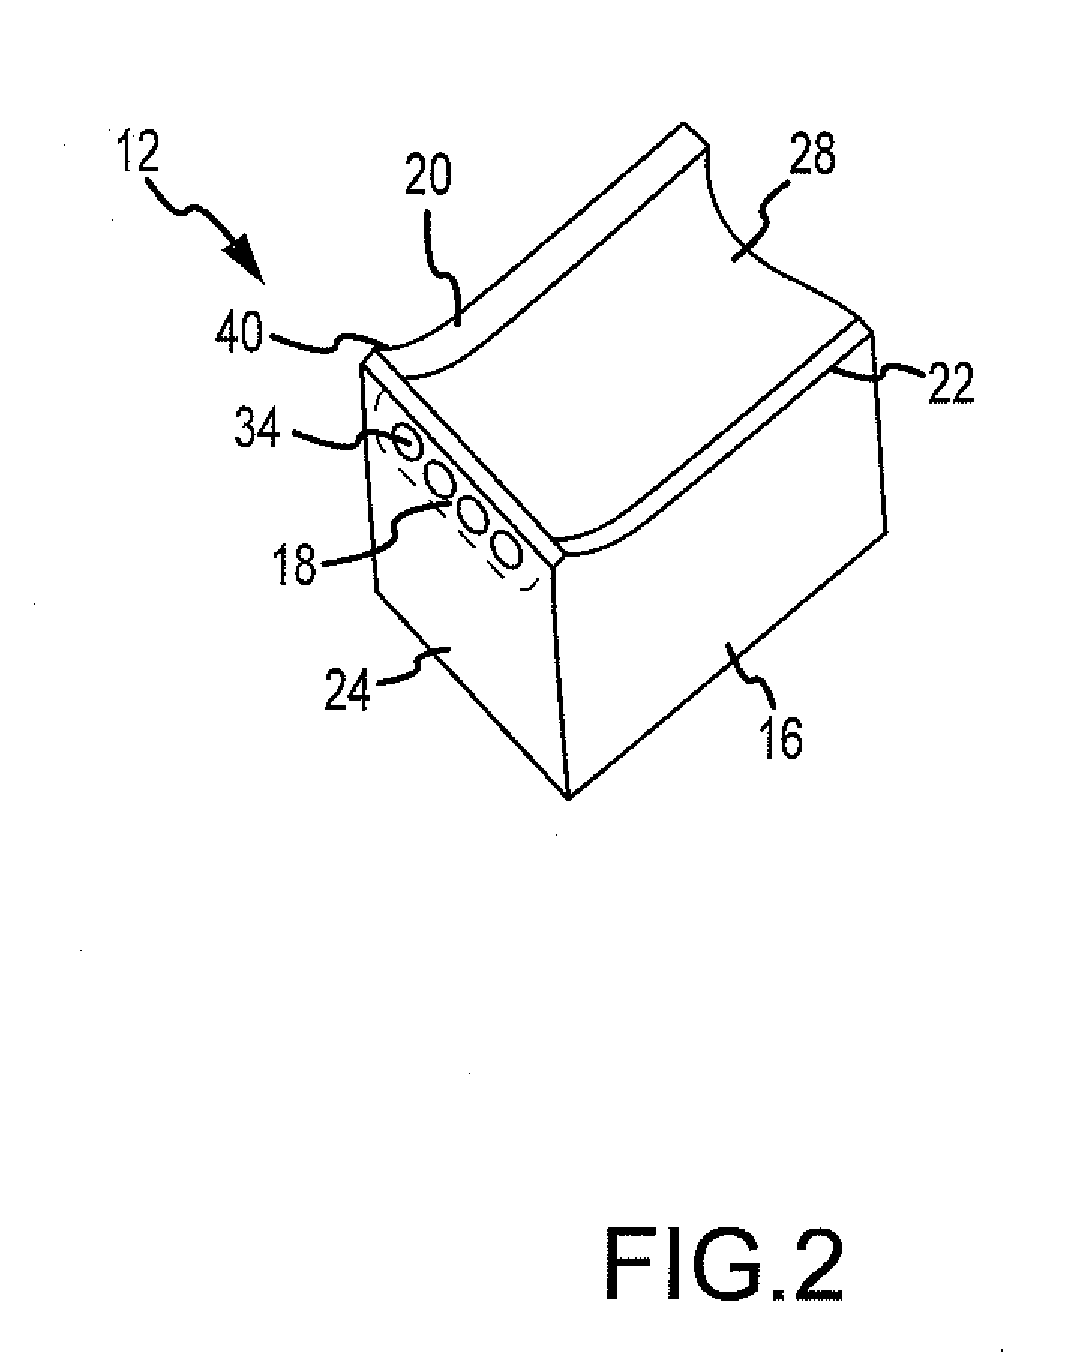 Apparatus and method for cooling and moving ablation elements